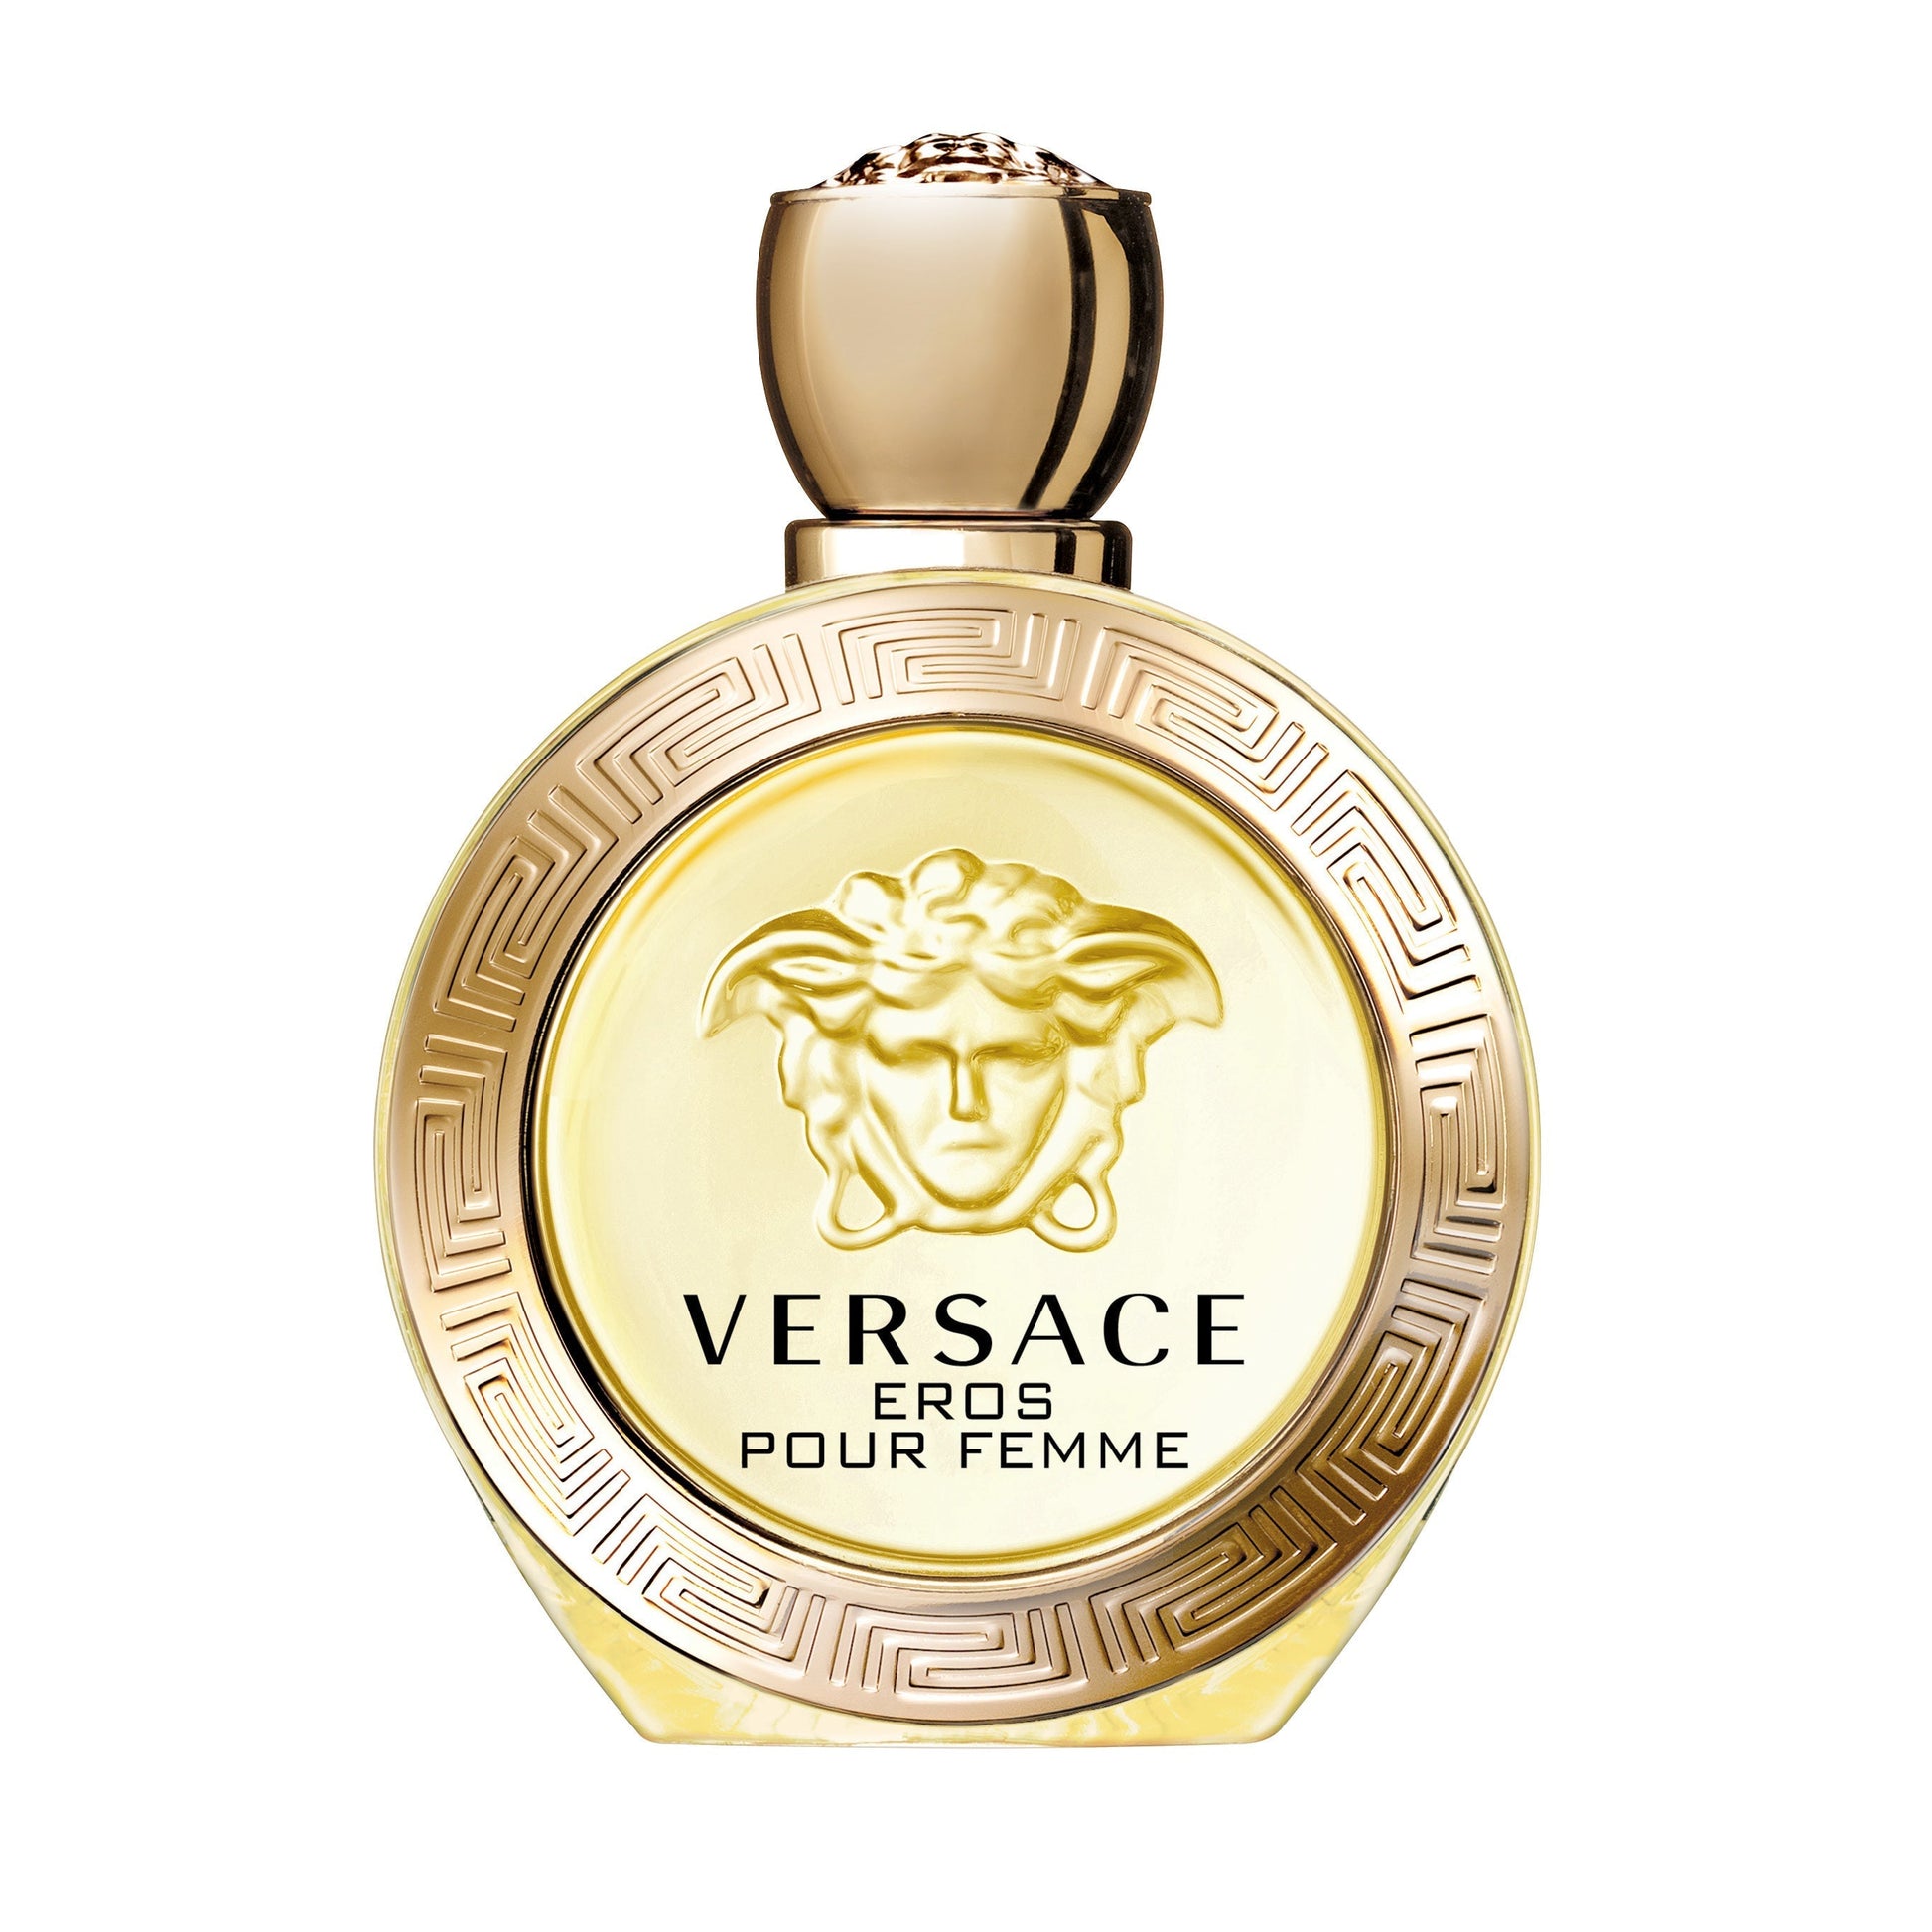 Versace Eros Pour Femme EDT 100 ML on a white background